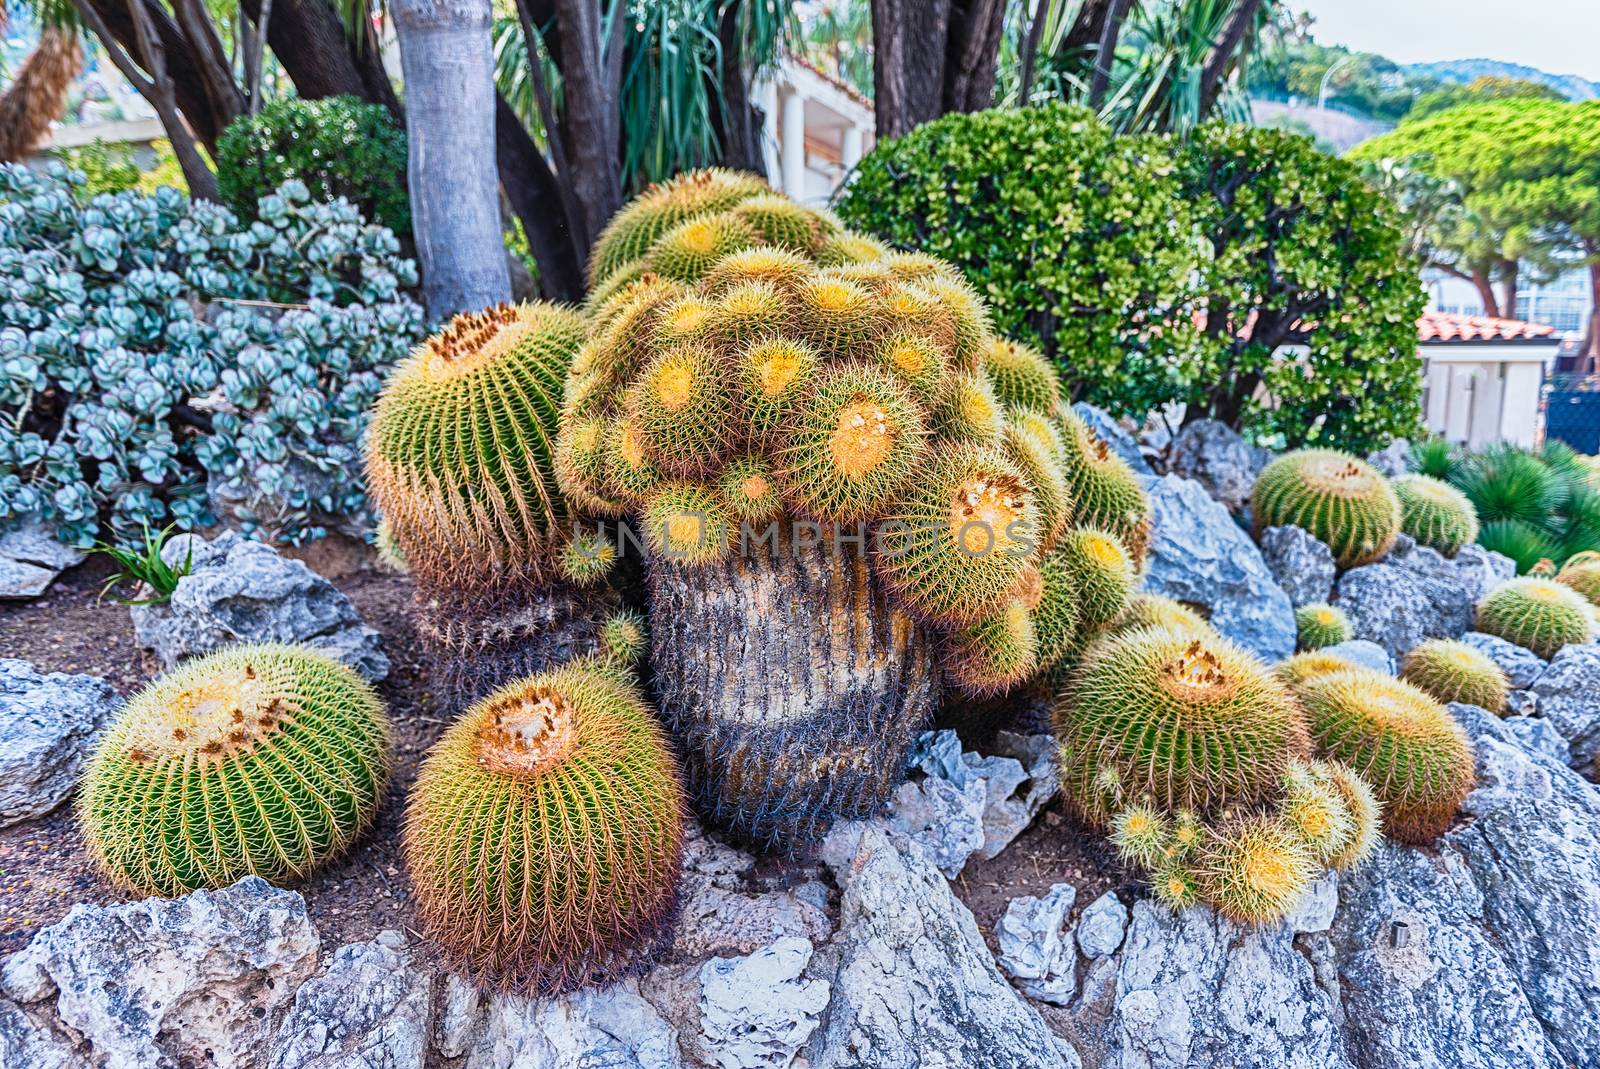 Cultivation of cactus and other succulent plants inside a botanical garden